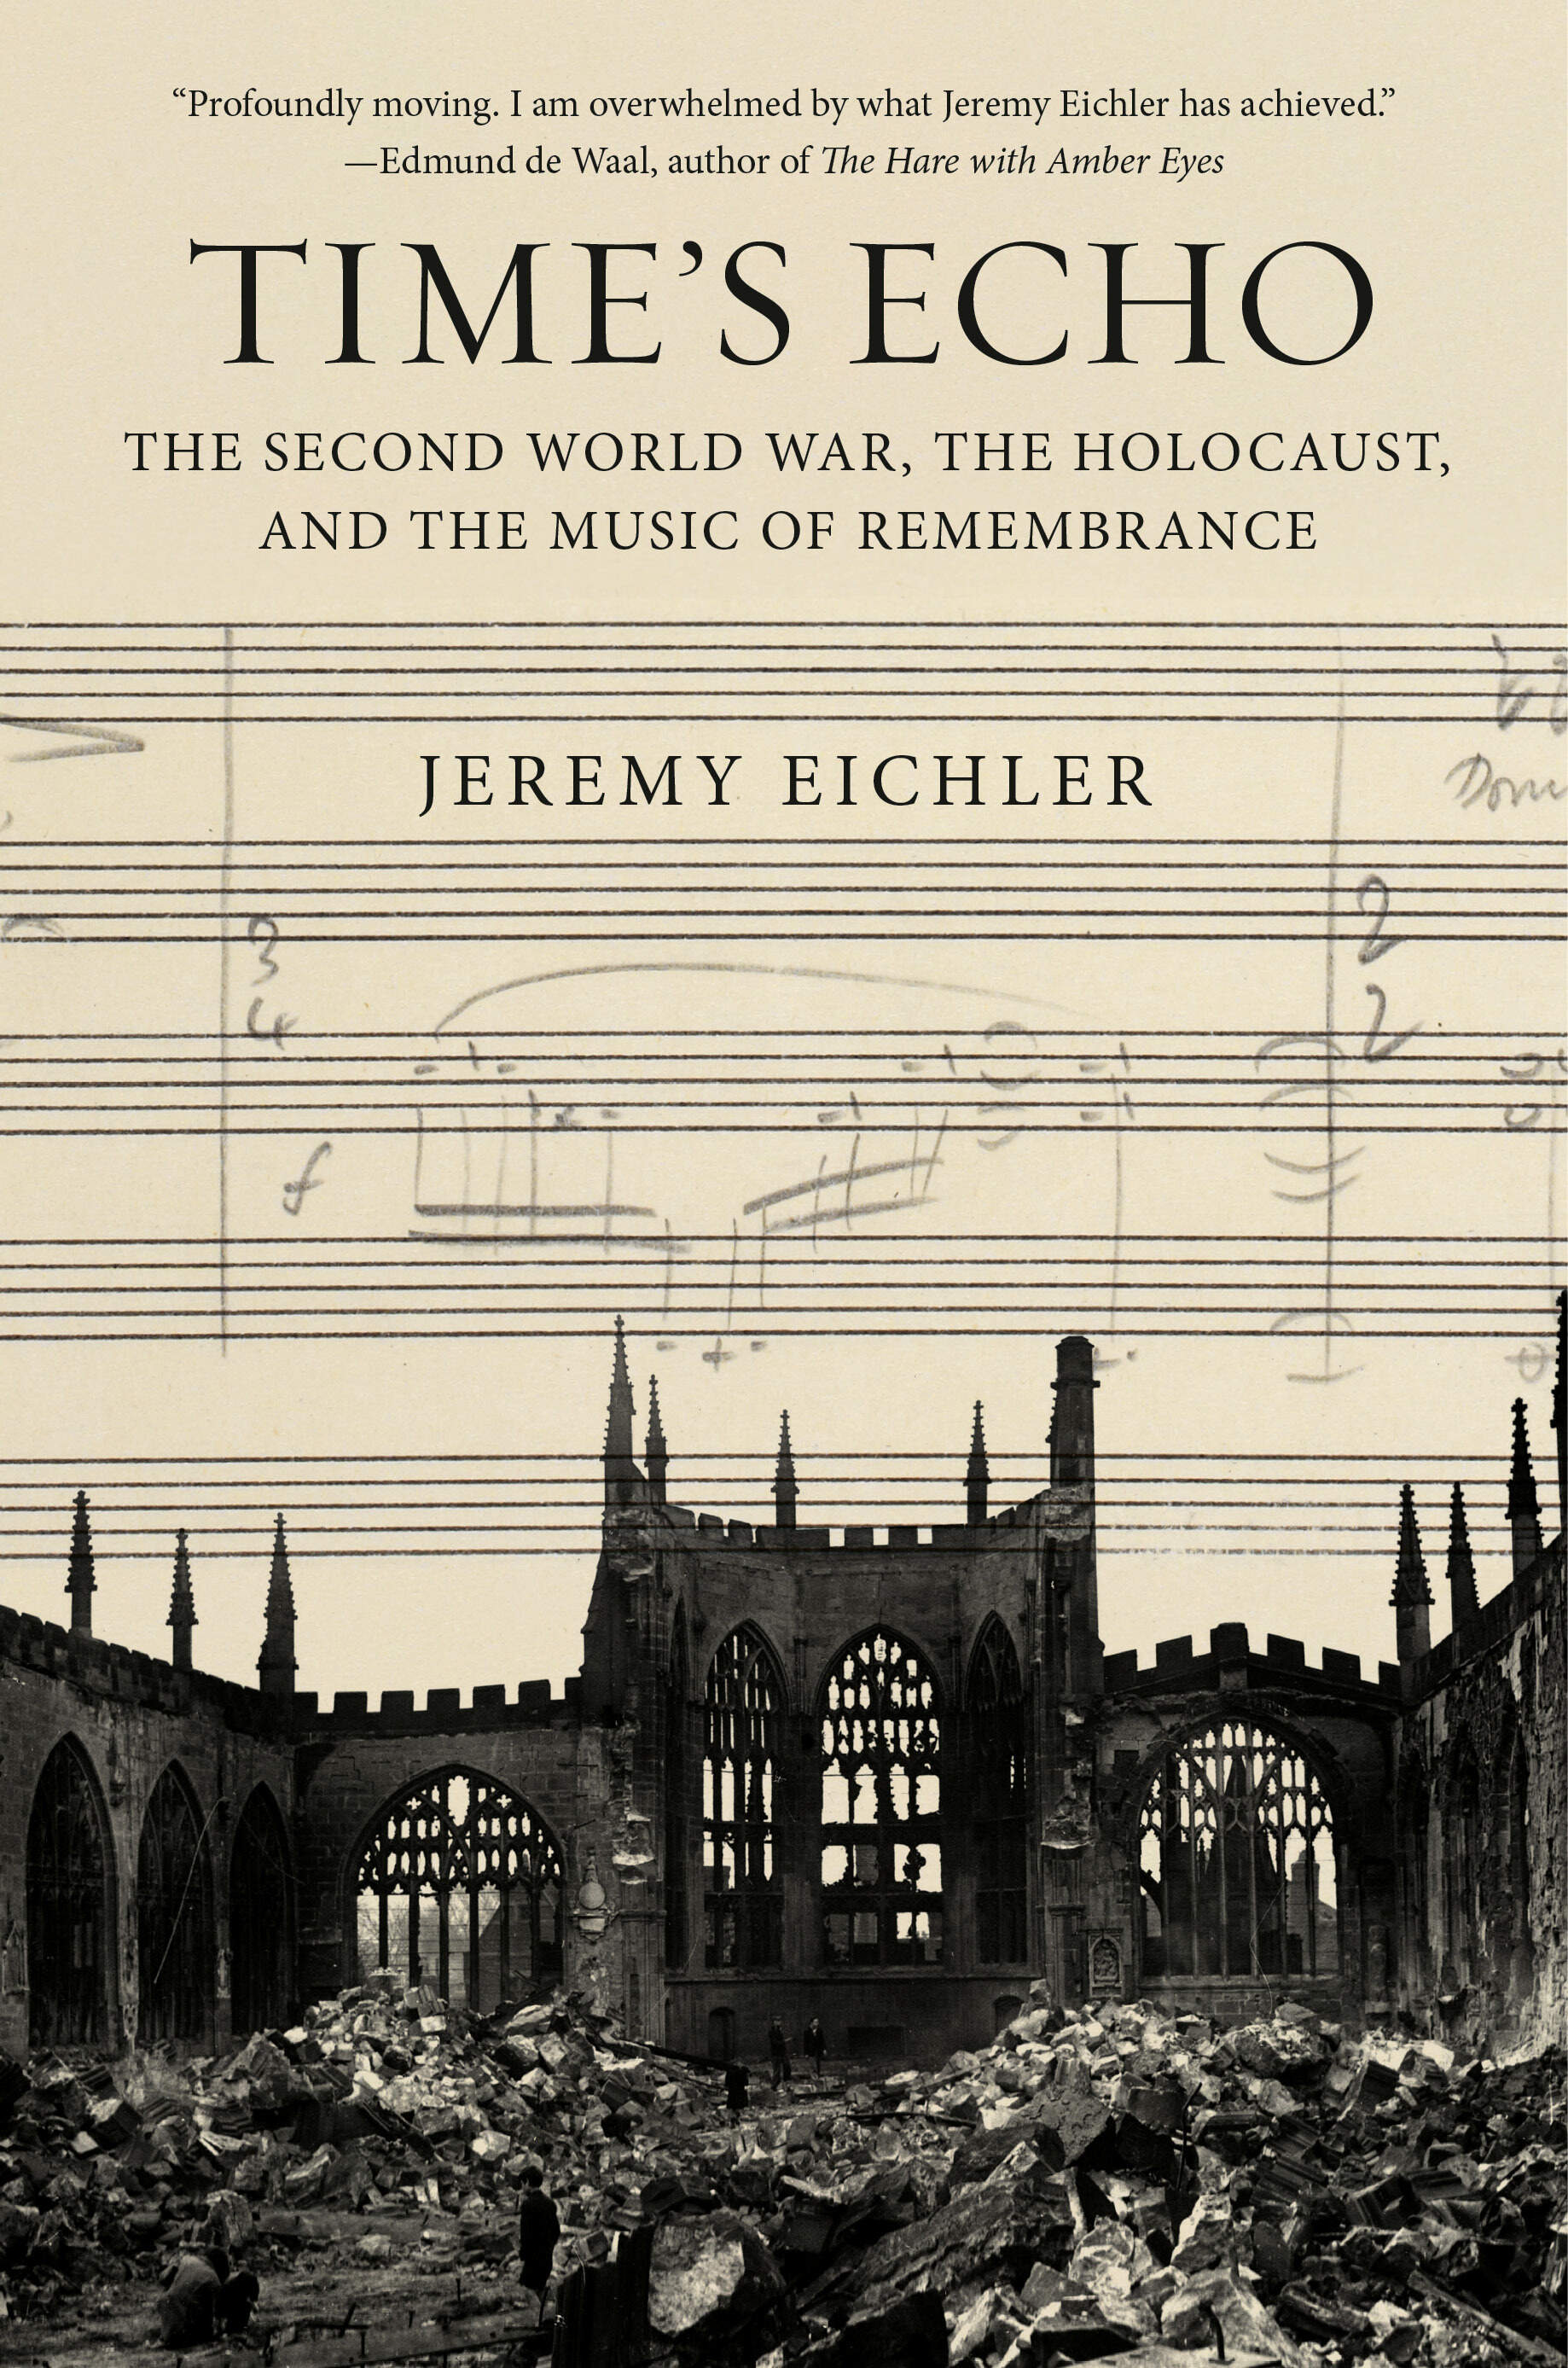 The cover of &quot;Time's Echo&quot; by Jeremy Eichler. (Courtesy of Knopf)